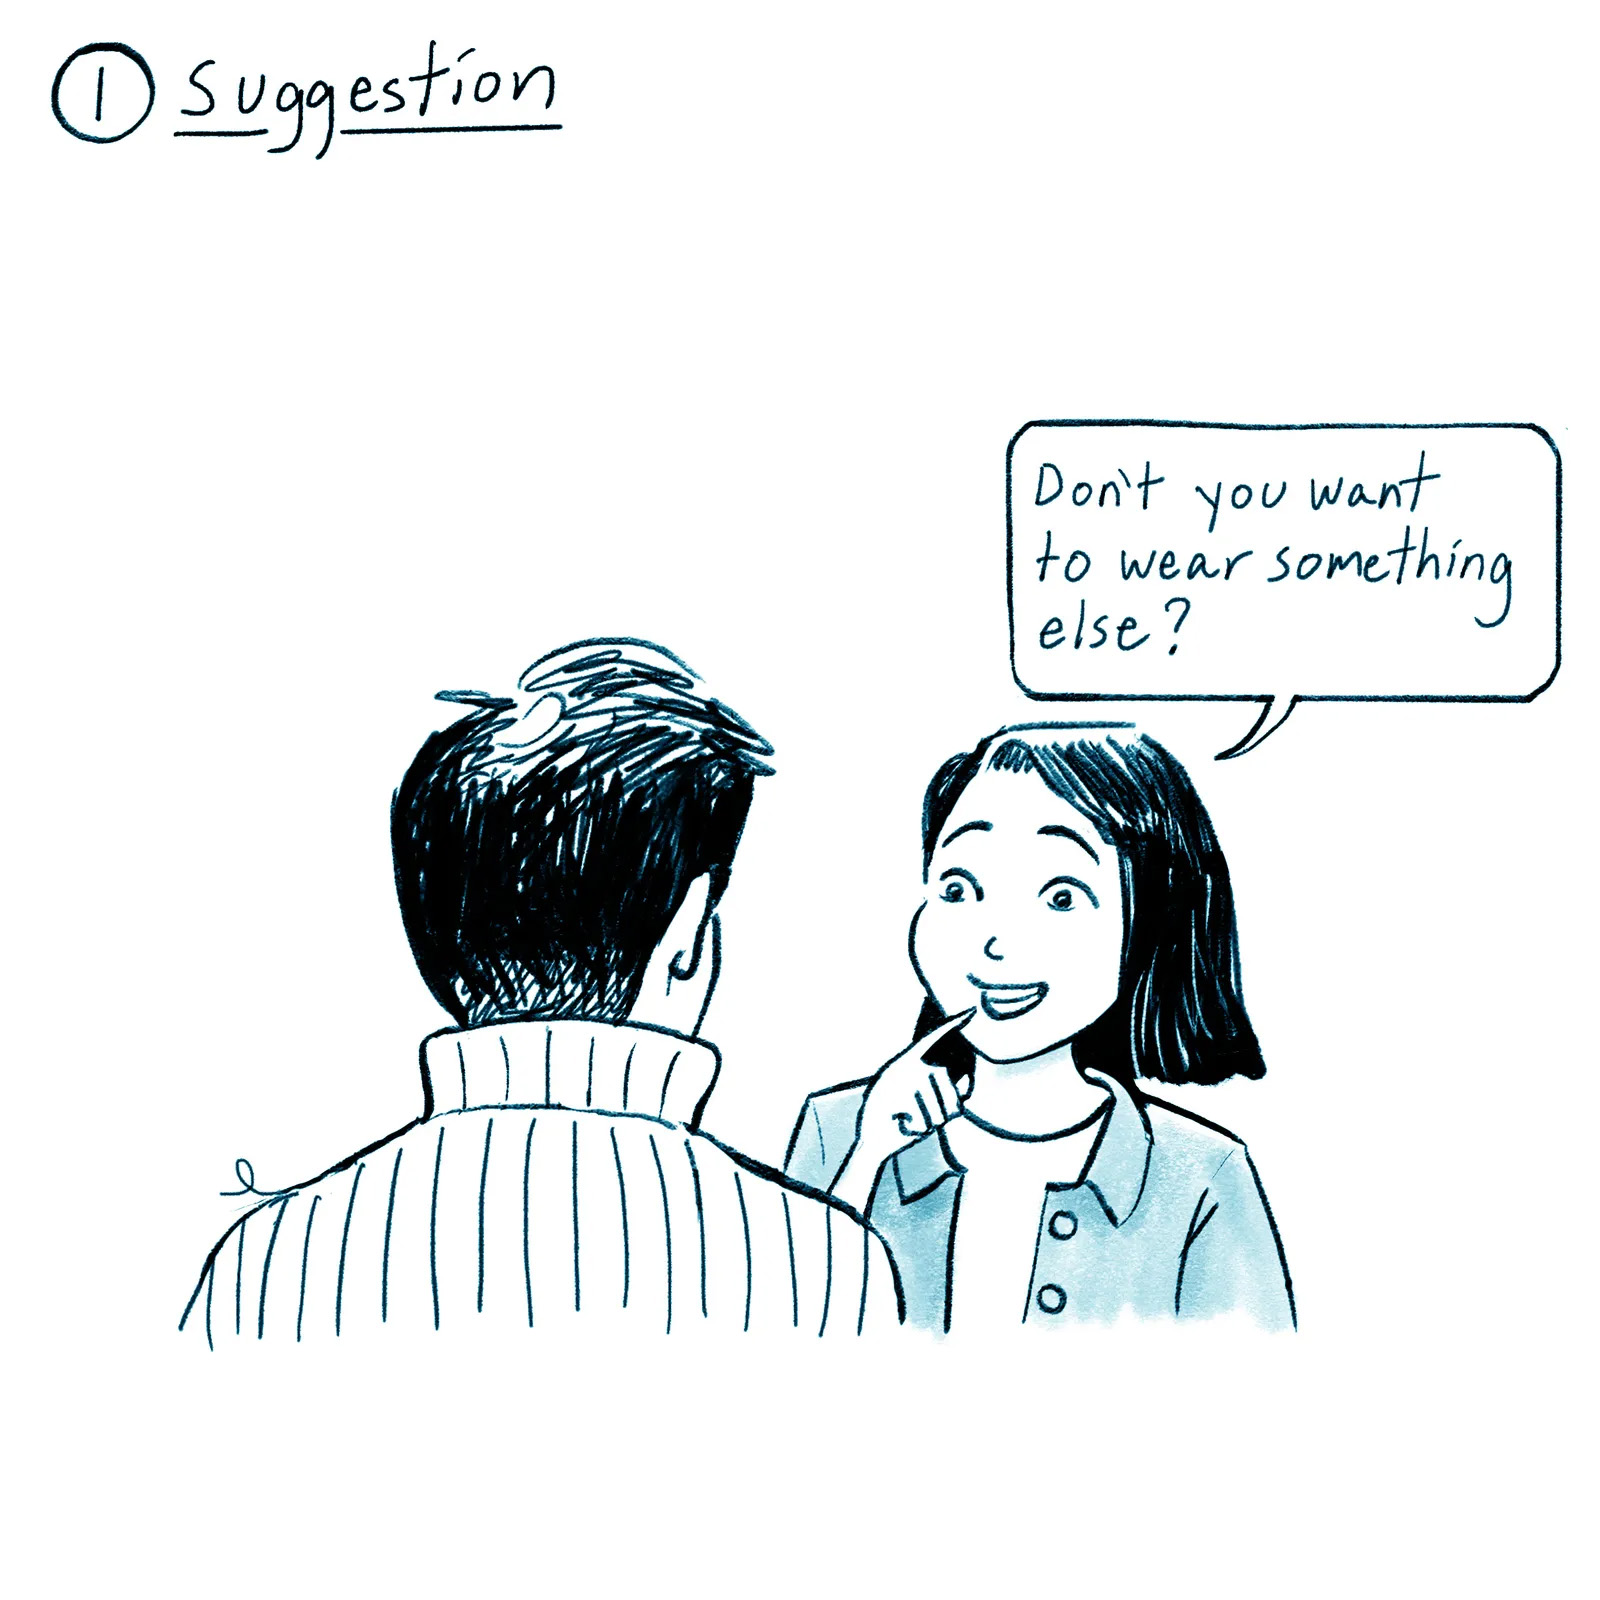 First panel of &ldquo;How to Disappear Your Partner&rsquo;s Ugly Sweater&rdquo; by&nbsp;Nguy&ecirc;n Kh&ocirc;i Nguy&#7877;n &rsquo;04. A cartoon drawing with the title &ldquo;1) Suggestion&rdquo; written at the top, with a drawing of a woman saying to a; Read More in the&nbsp;New Yorker